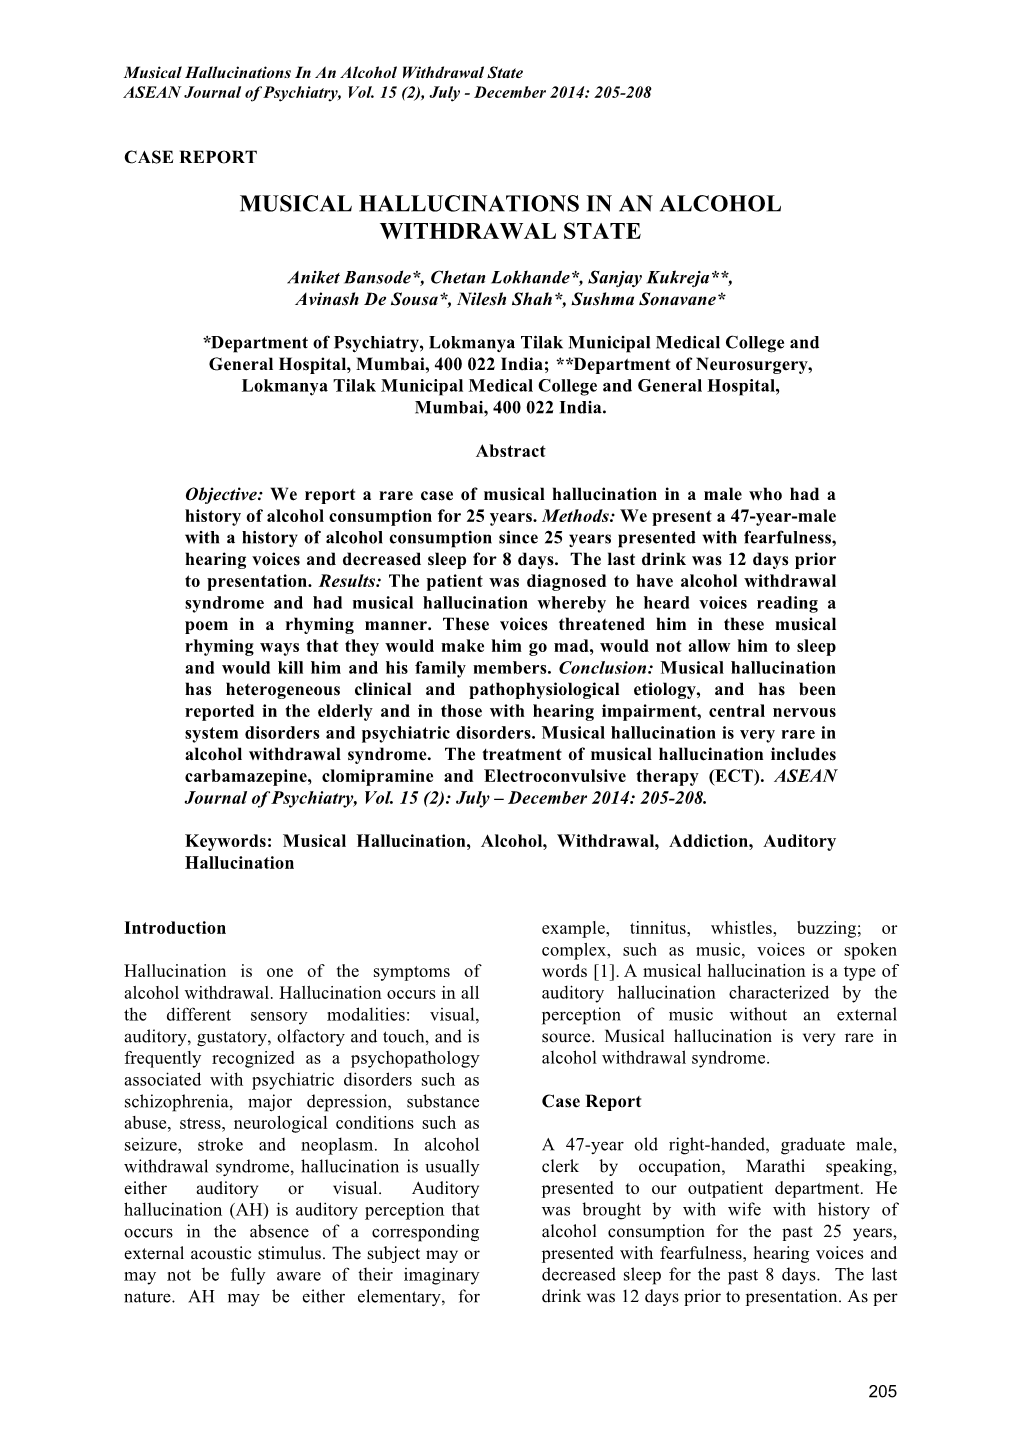 Musical Hallucinations in an Alcohol Withdrawal State ASEAN Journal of Psychiatry, Vol